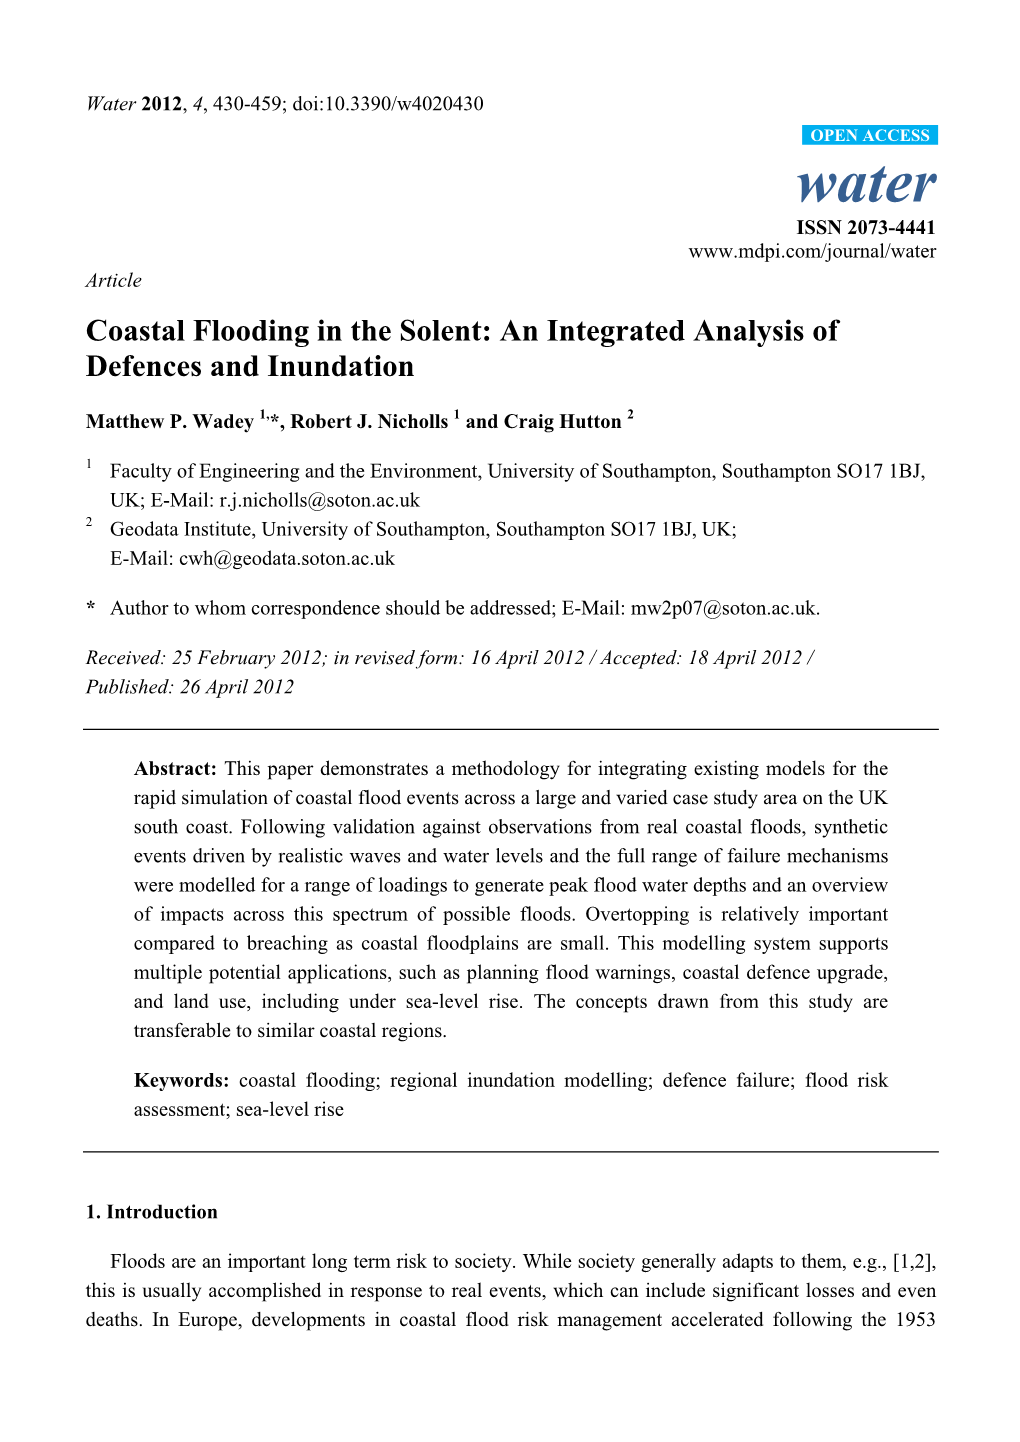 Coastal Flooding in the Solent: an Integrated Analysis of Defences and Inundation